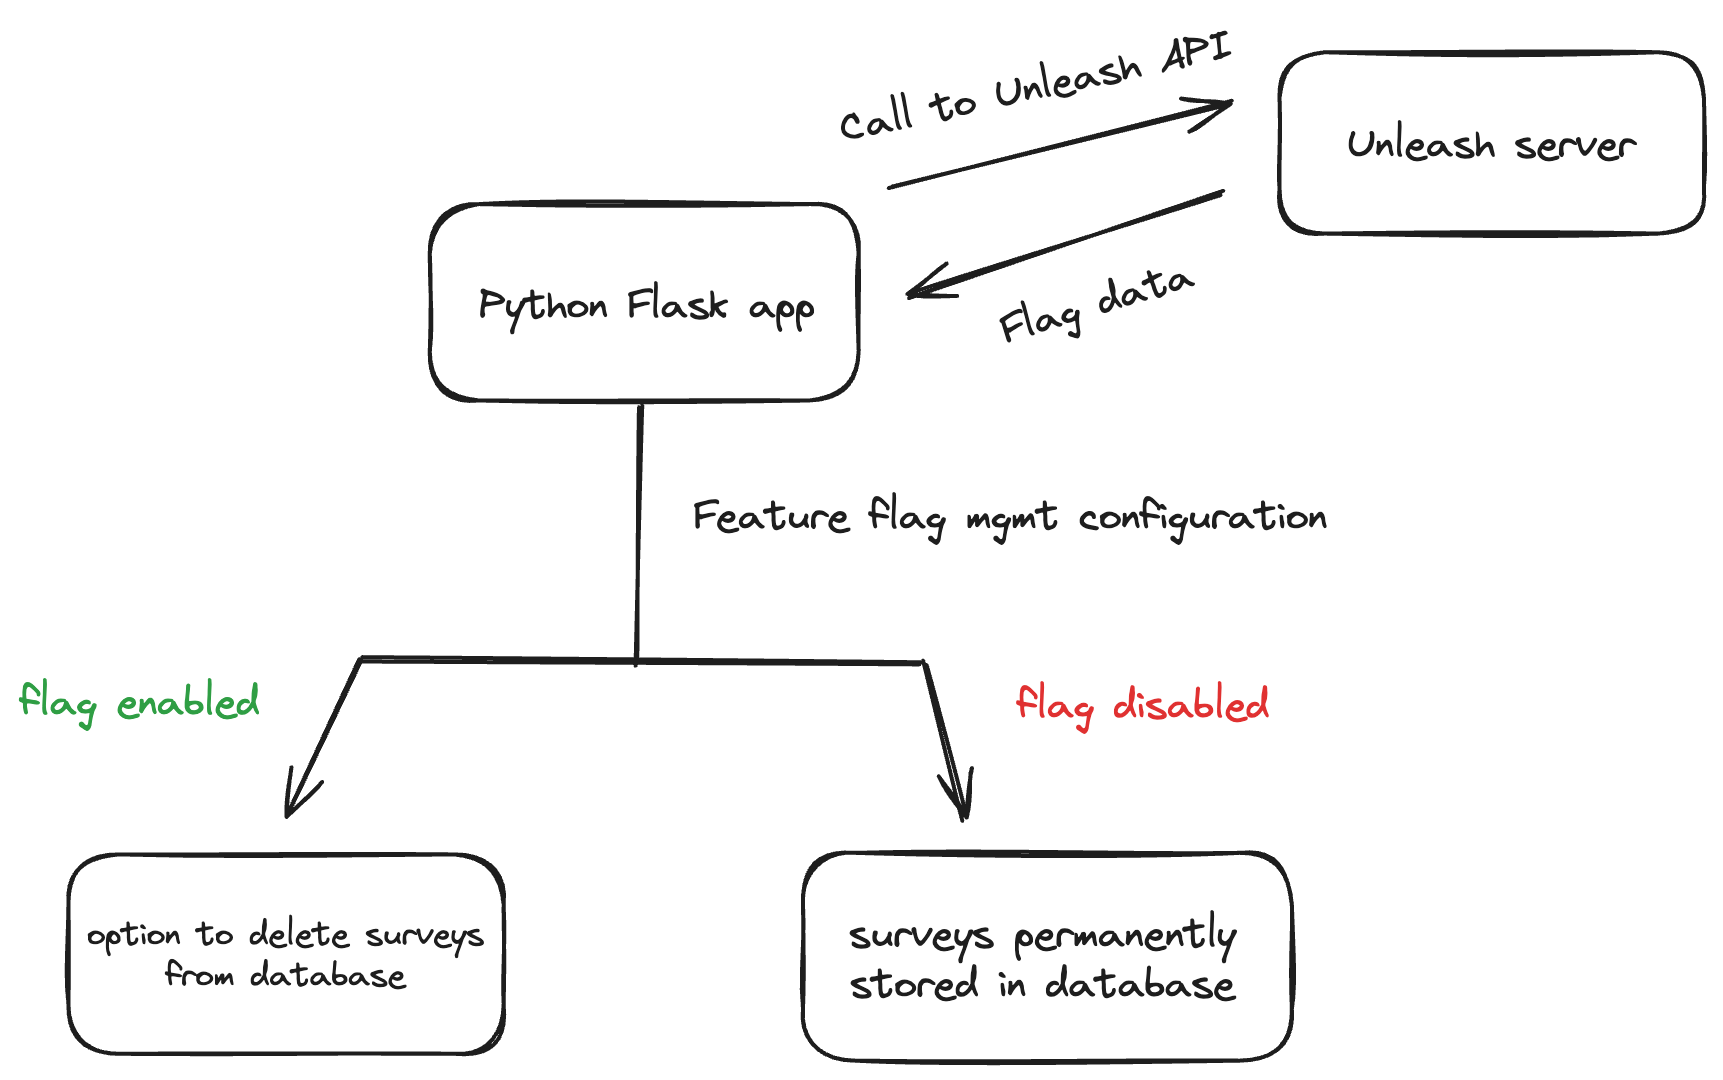 An architectural diagram of our Python app using Unleash feature flags